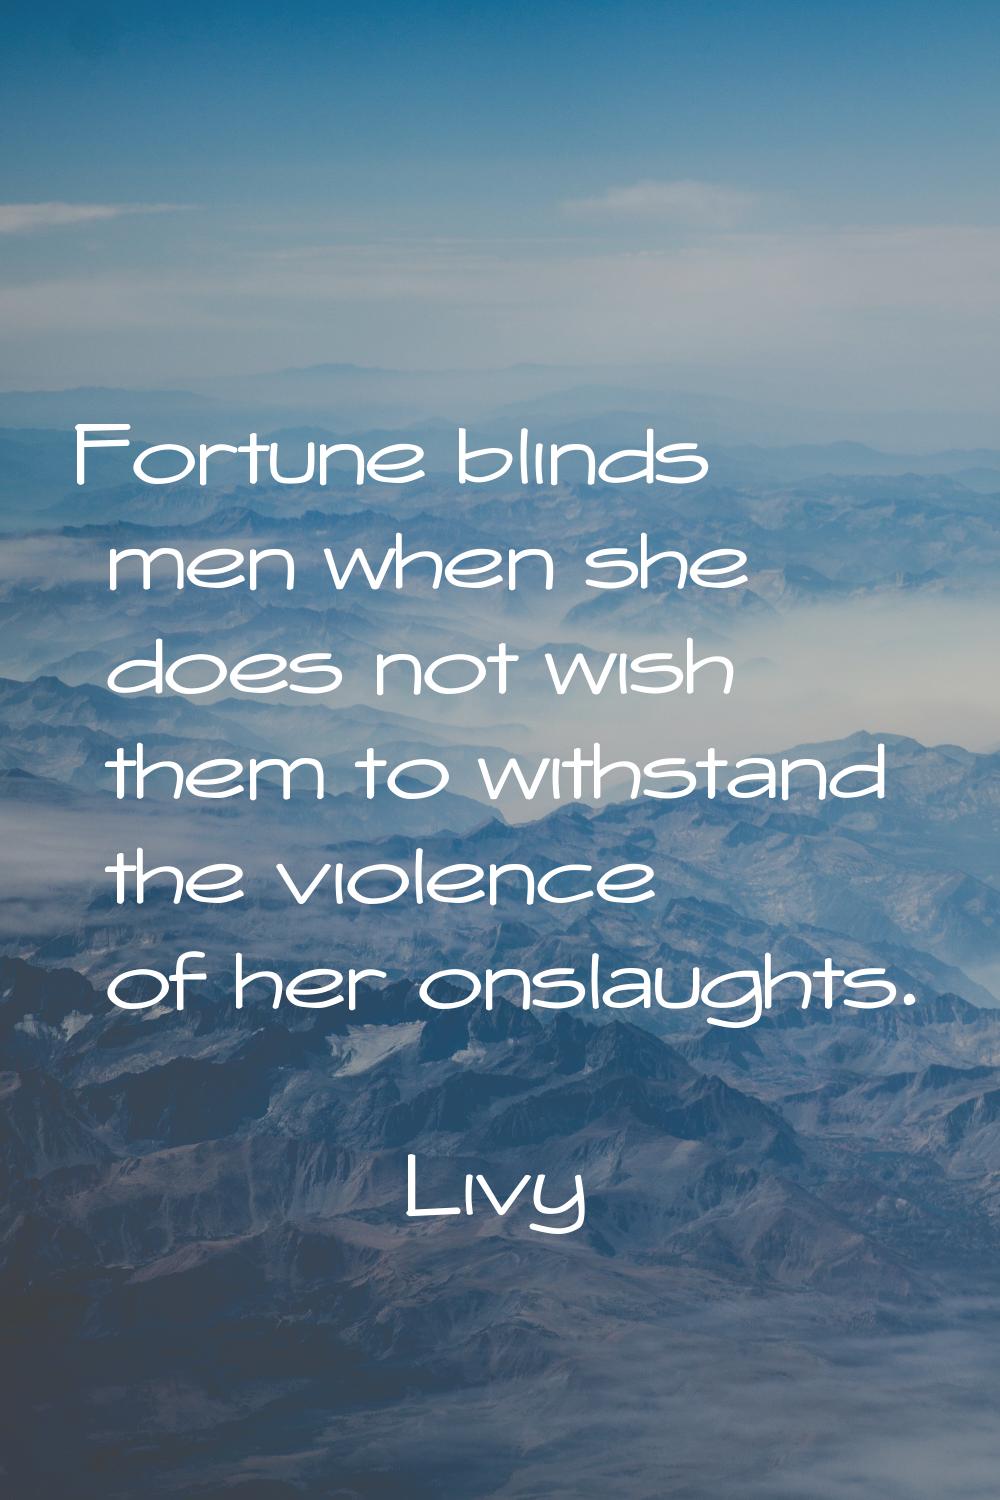 Fortune blinds men when she does not wish them to withstand the violence of her onslaughts.